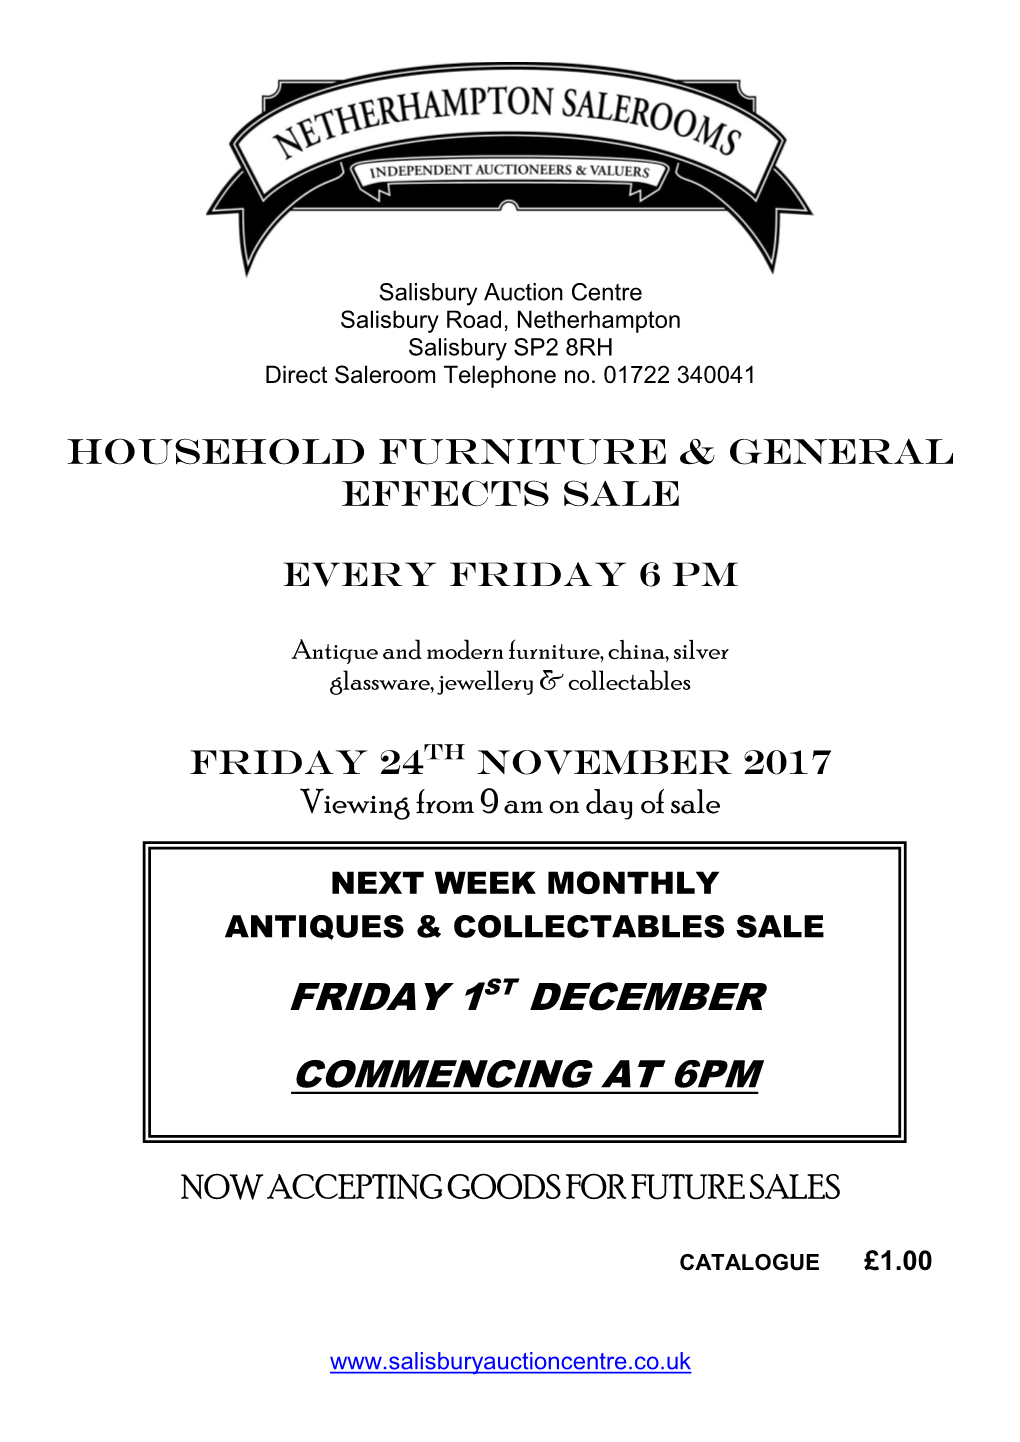 Friday 1St December Commencing At